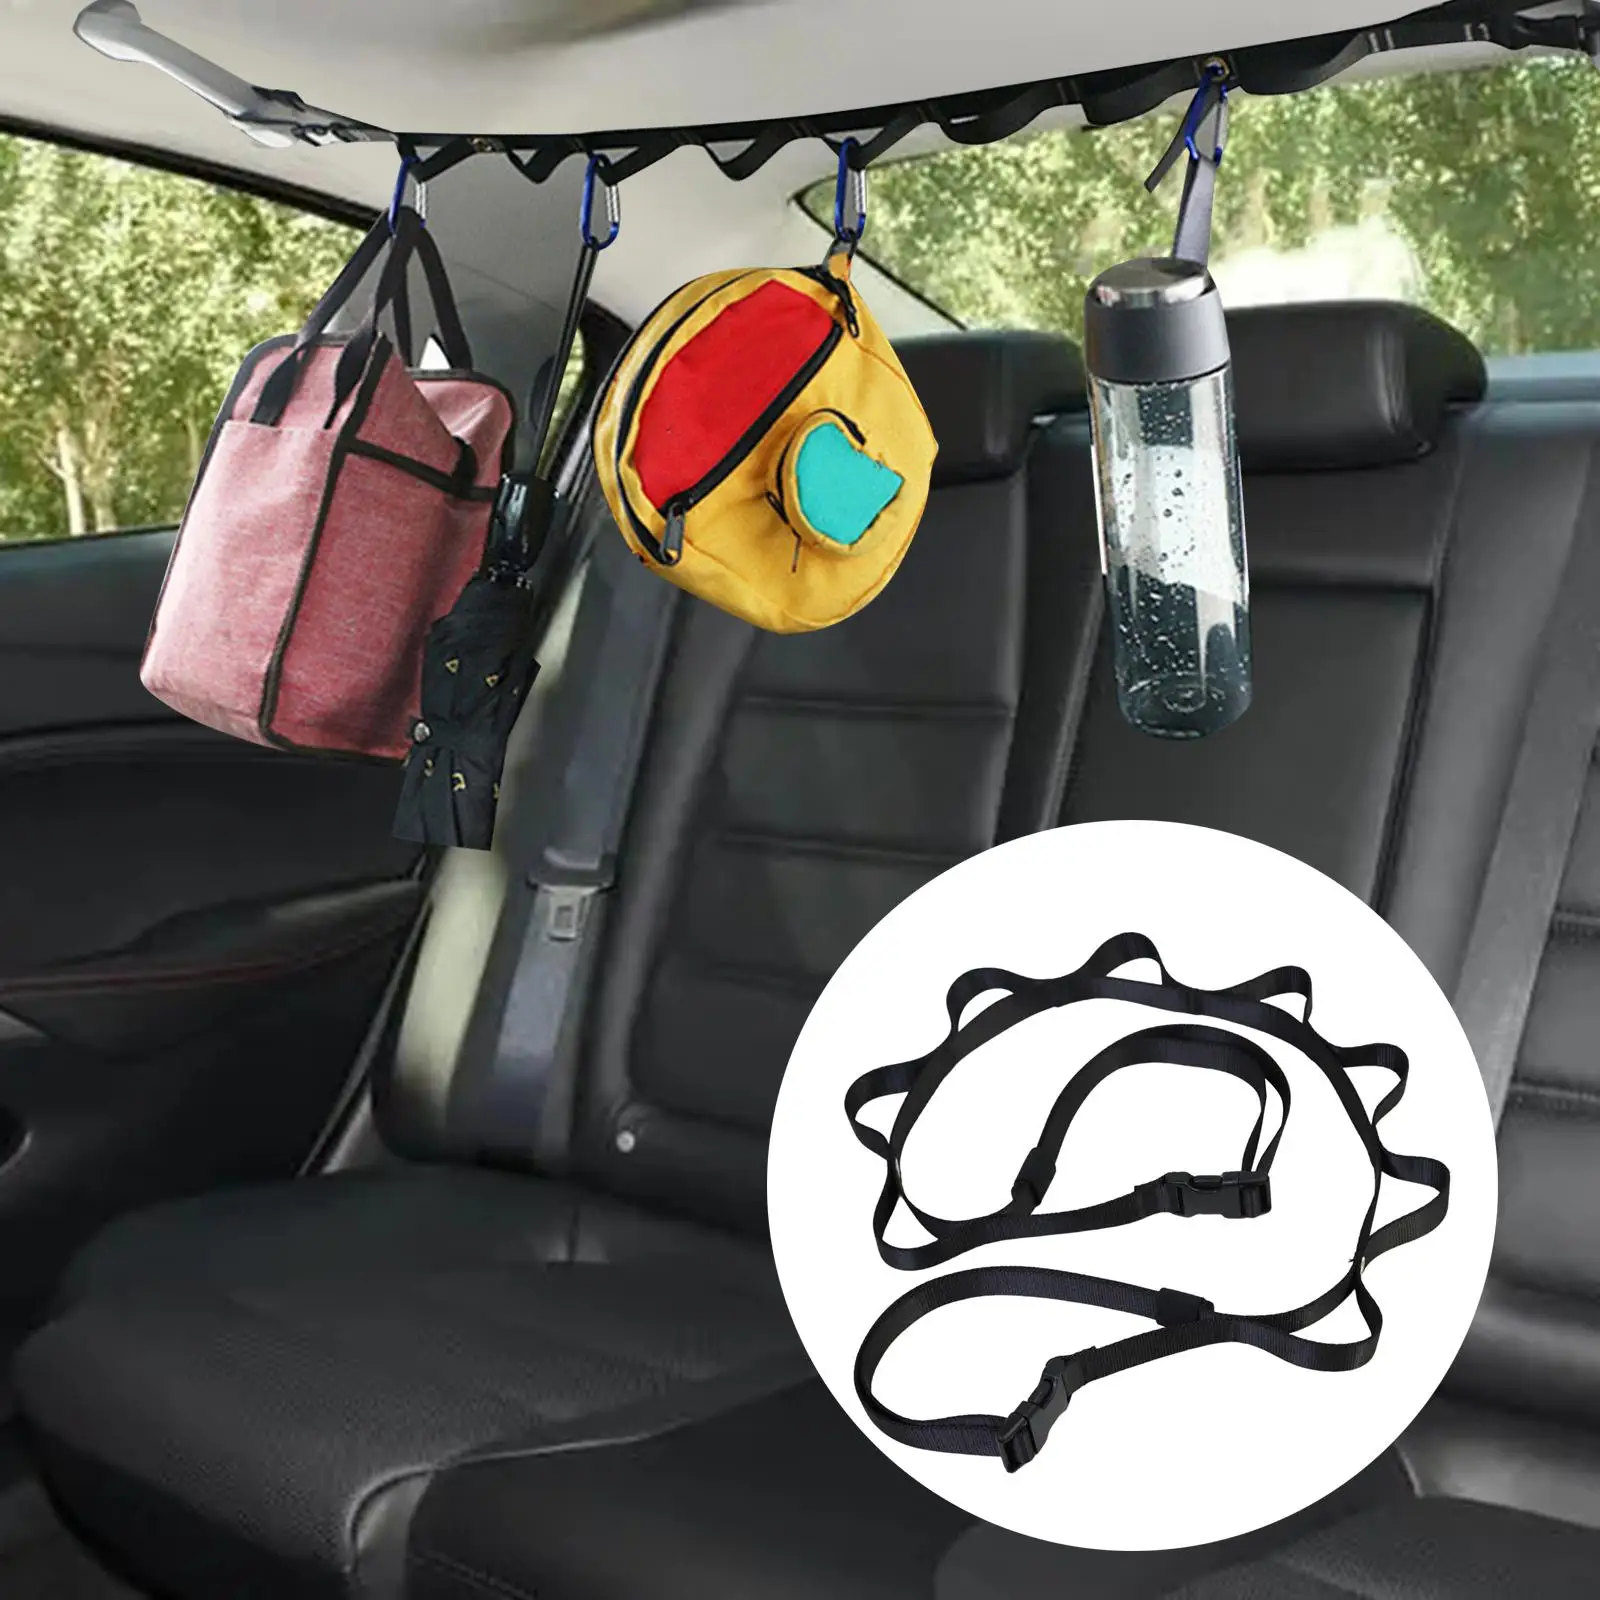 Car Clothesline Hanging Rope Luggage Straps for Travel Luggage Rack Trunk